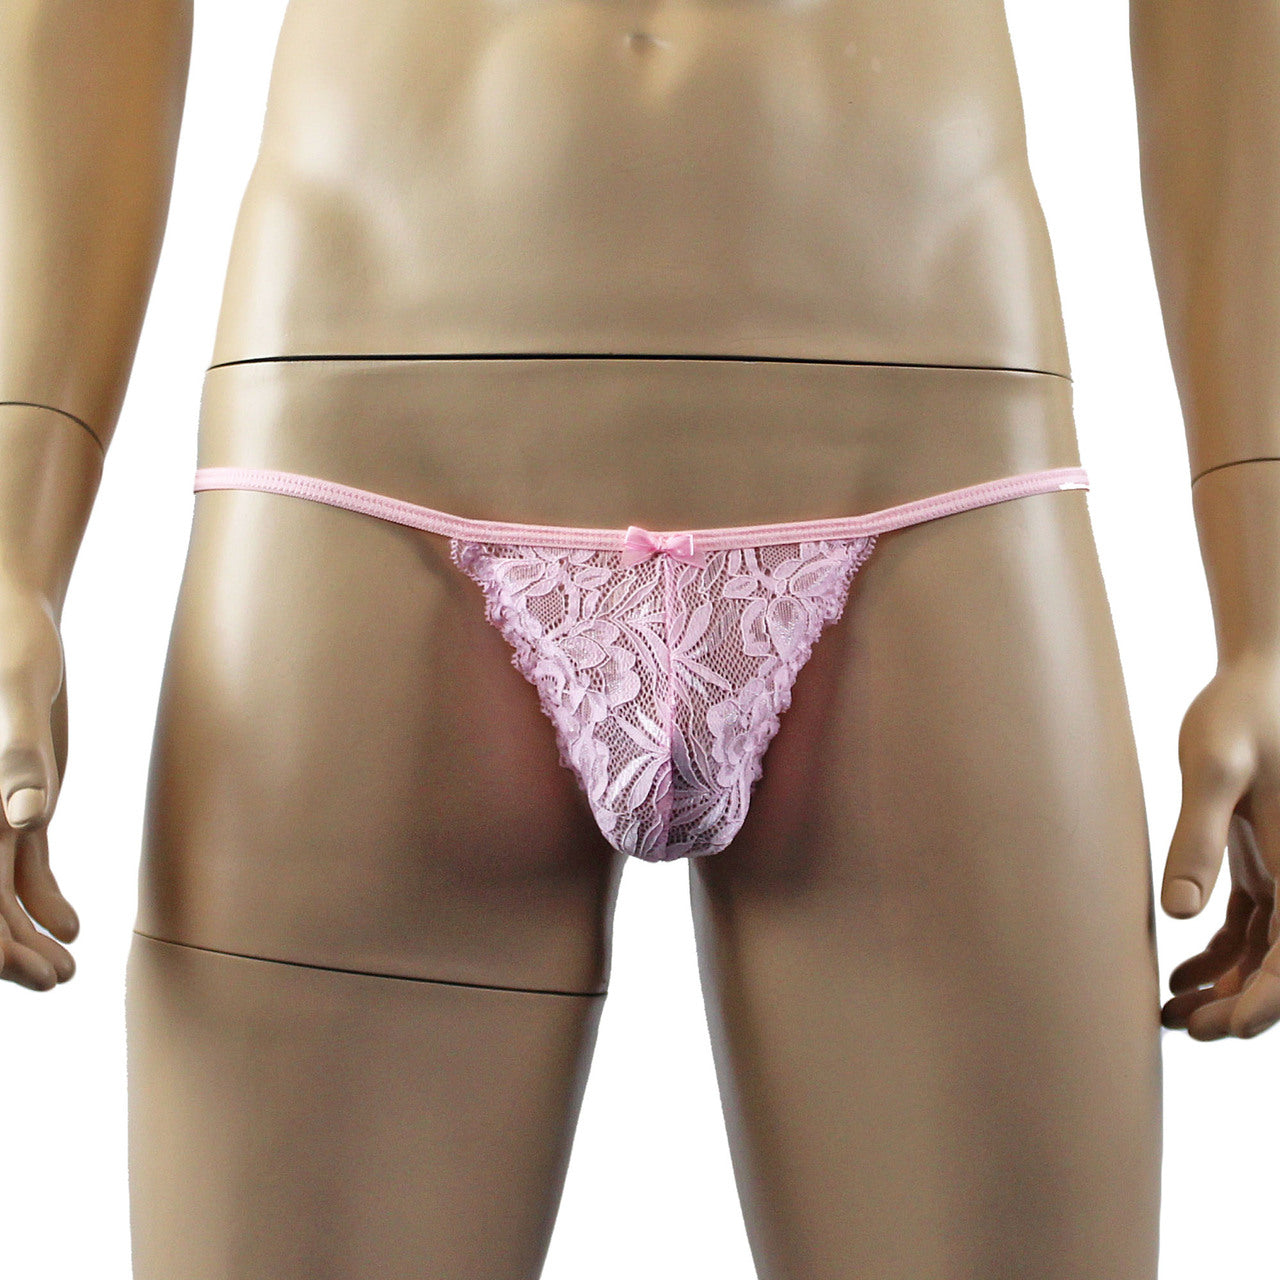 Mens Kristy Sexy Lace Pouch G string Panty Male Lingerie Light Pink